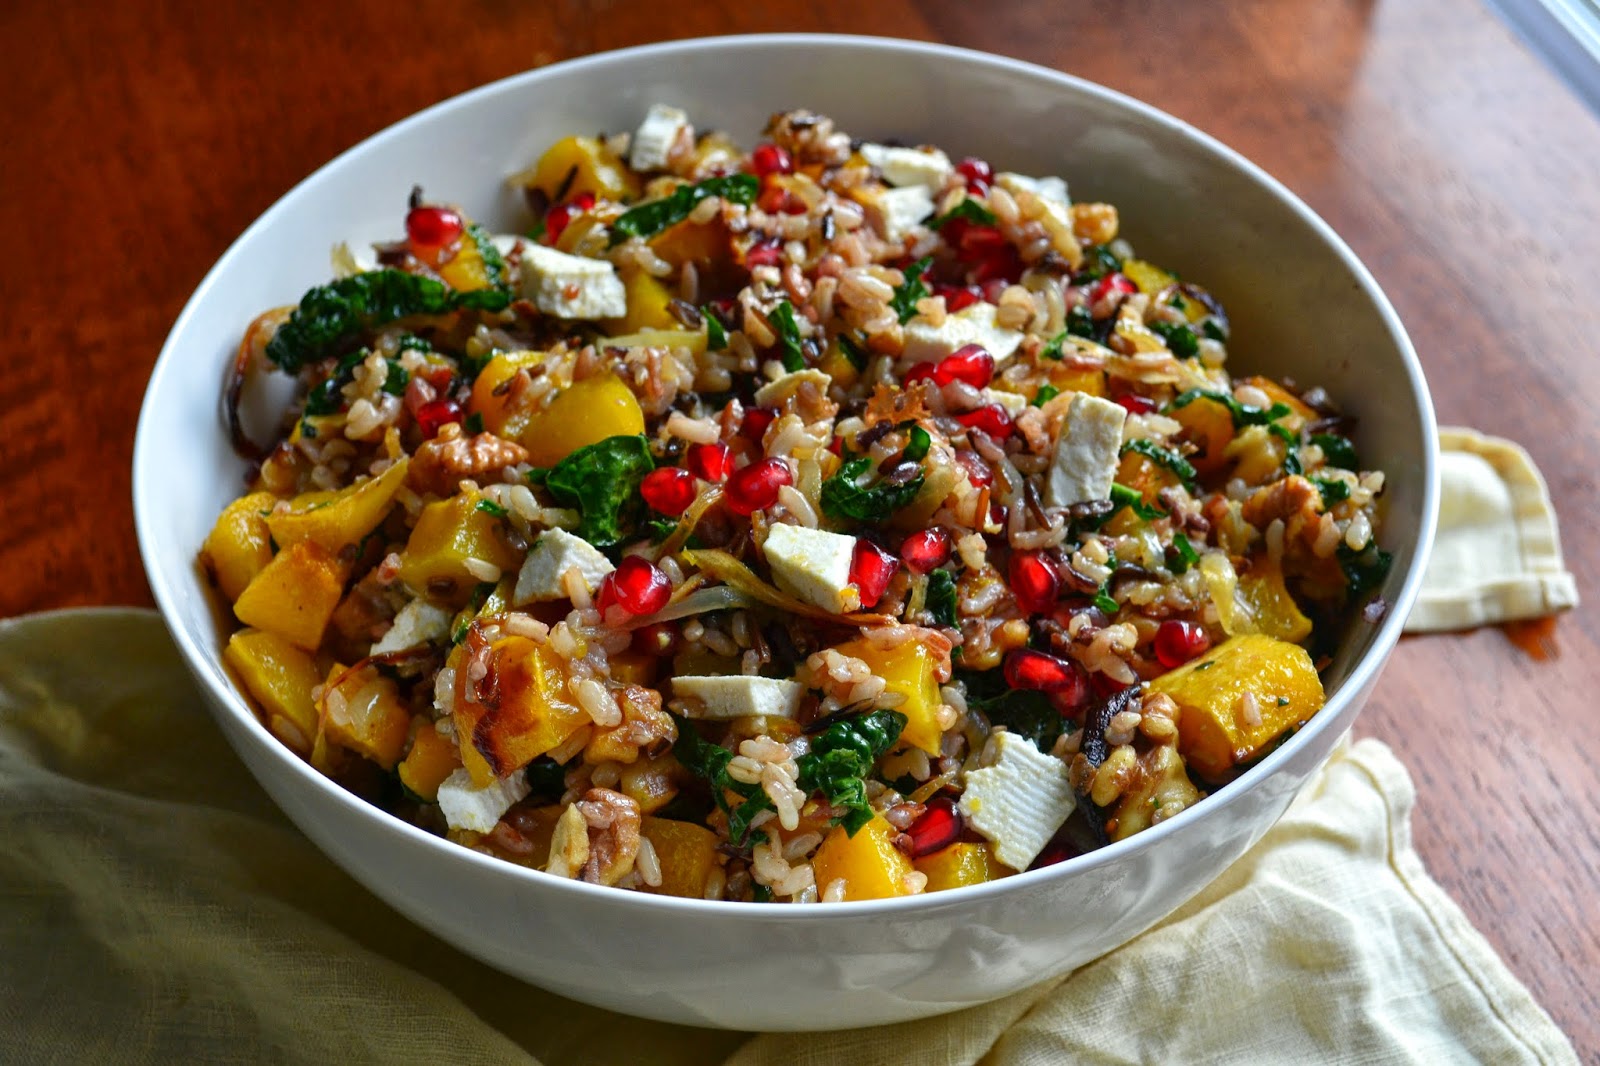 Nourish The Roots: Wild Rice Salad with Butternut Squash and Pomegranate